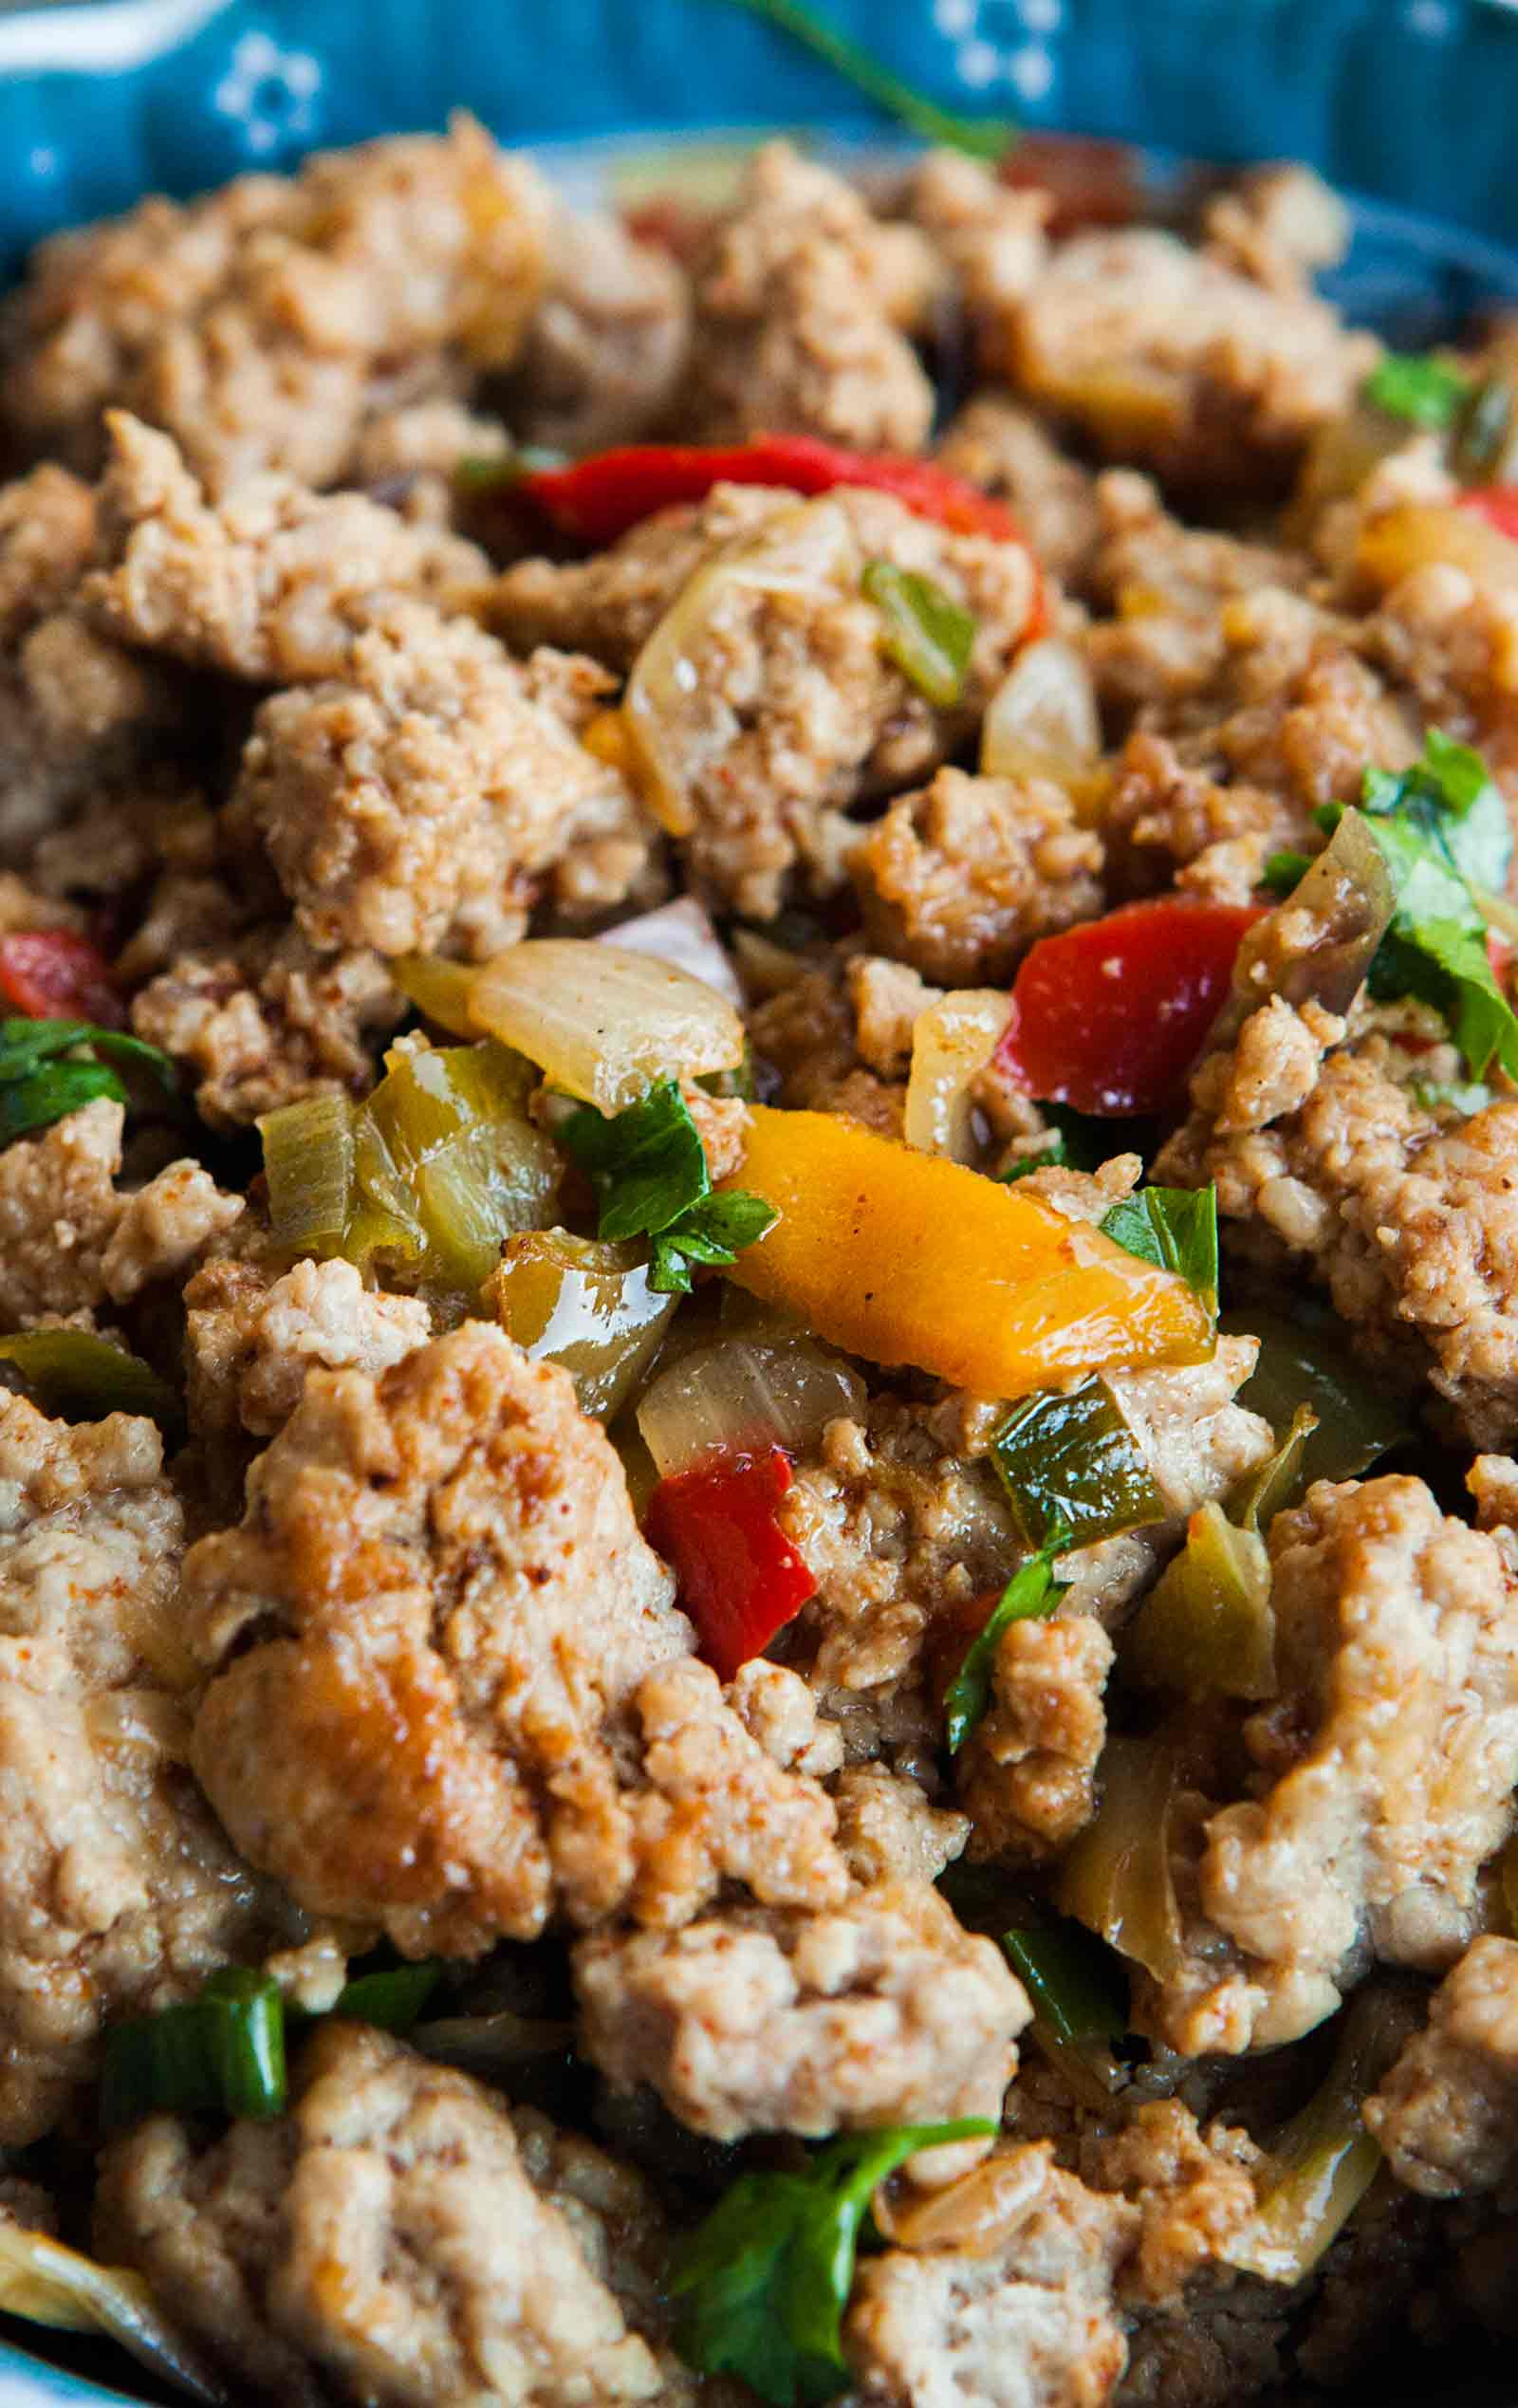 Recipes With Ground Turkey
 Mom’s Ground Turkey and Peppers Recipe